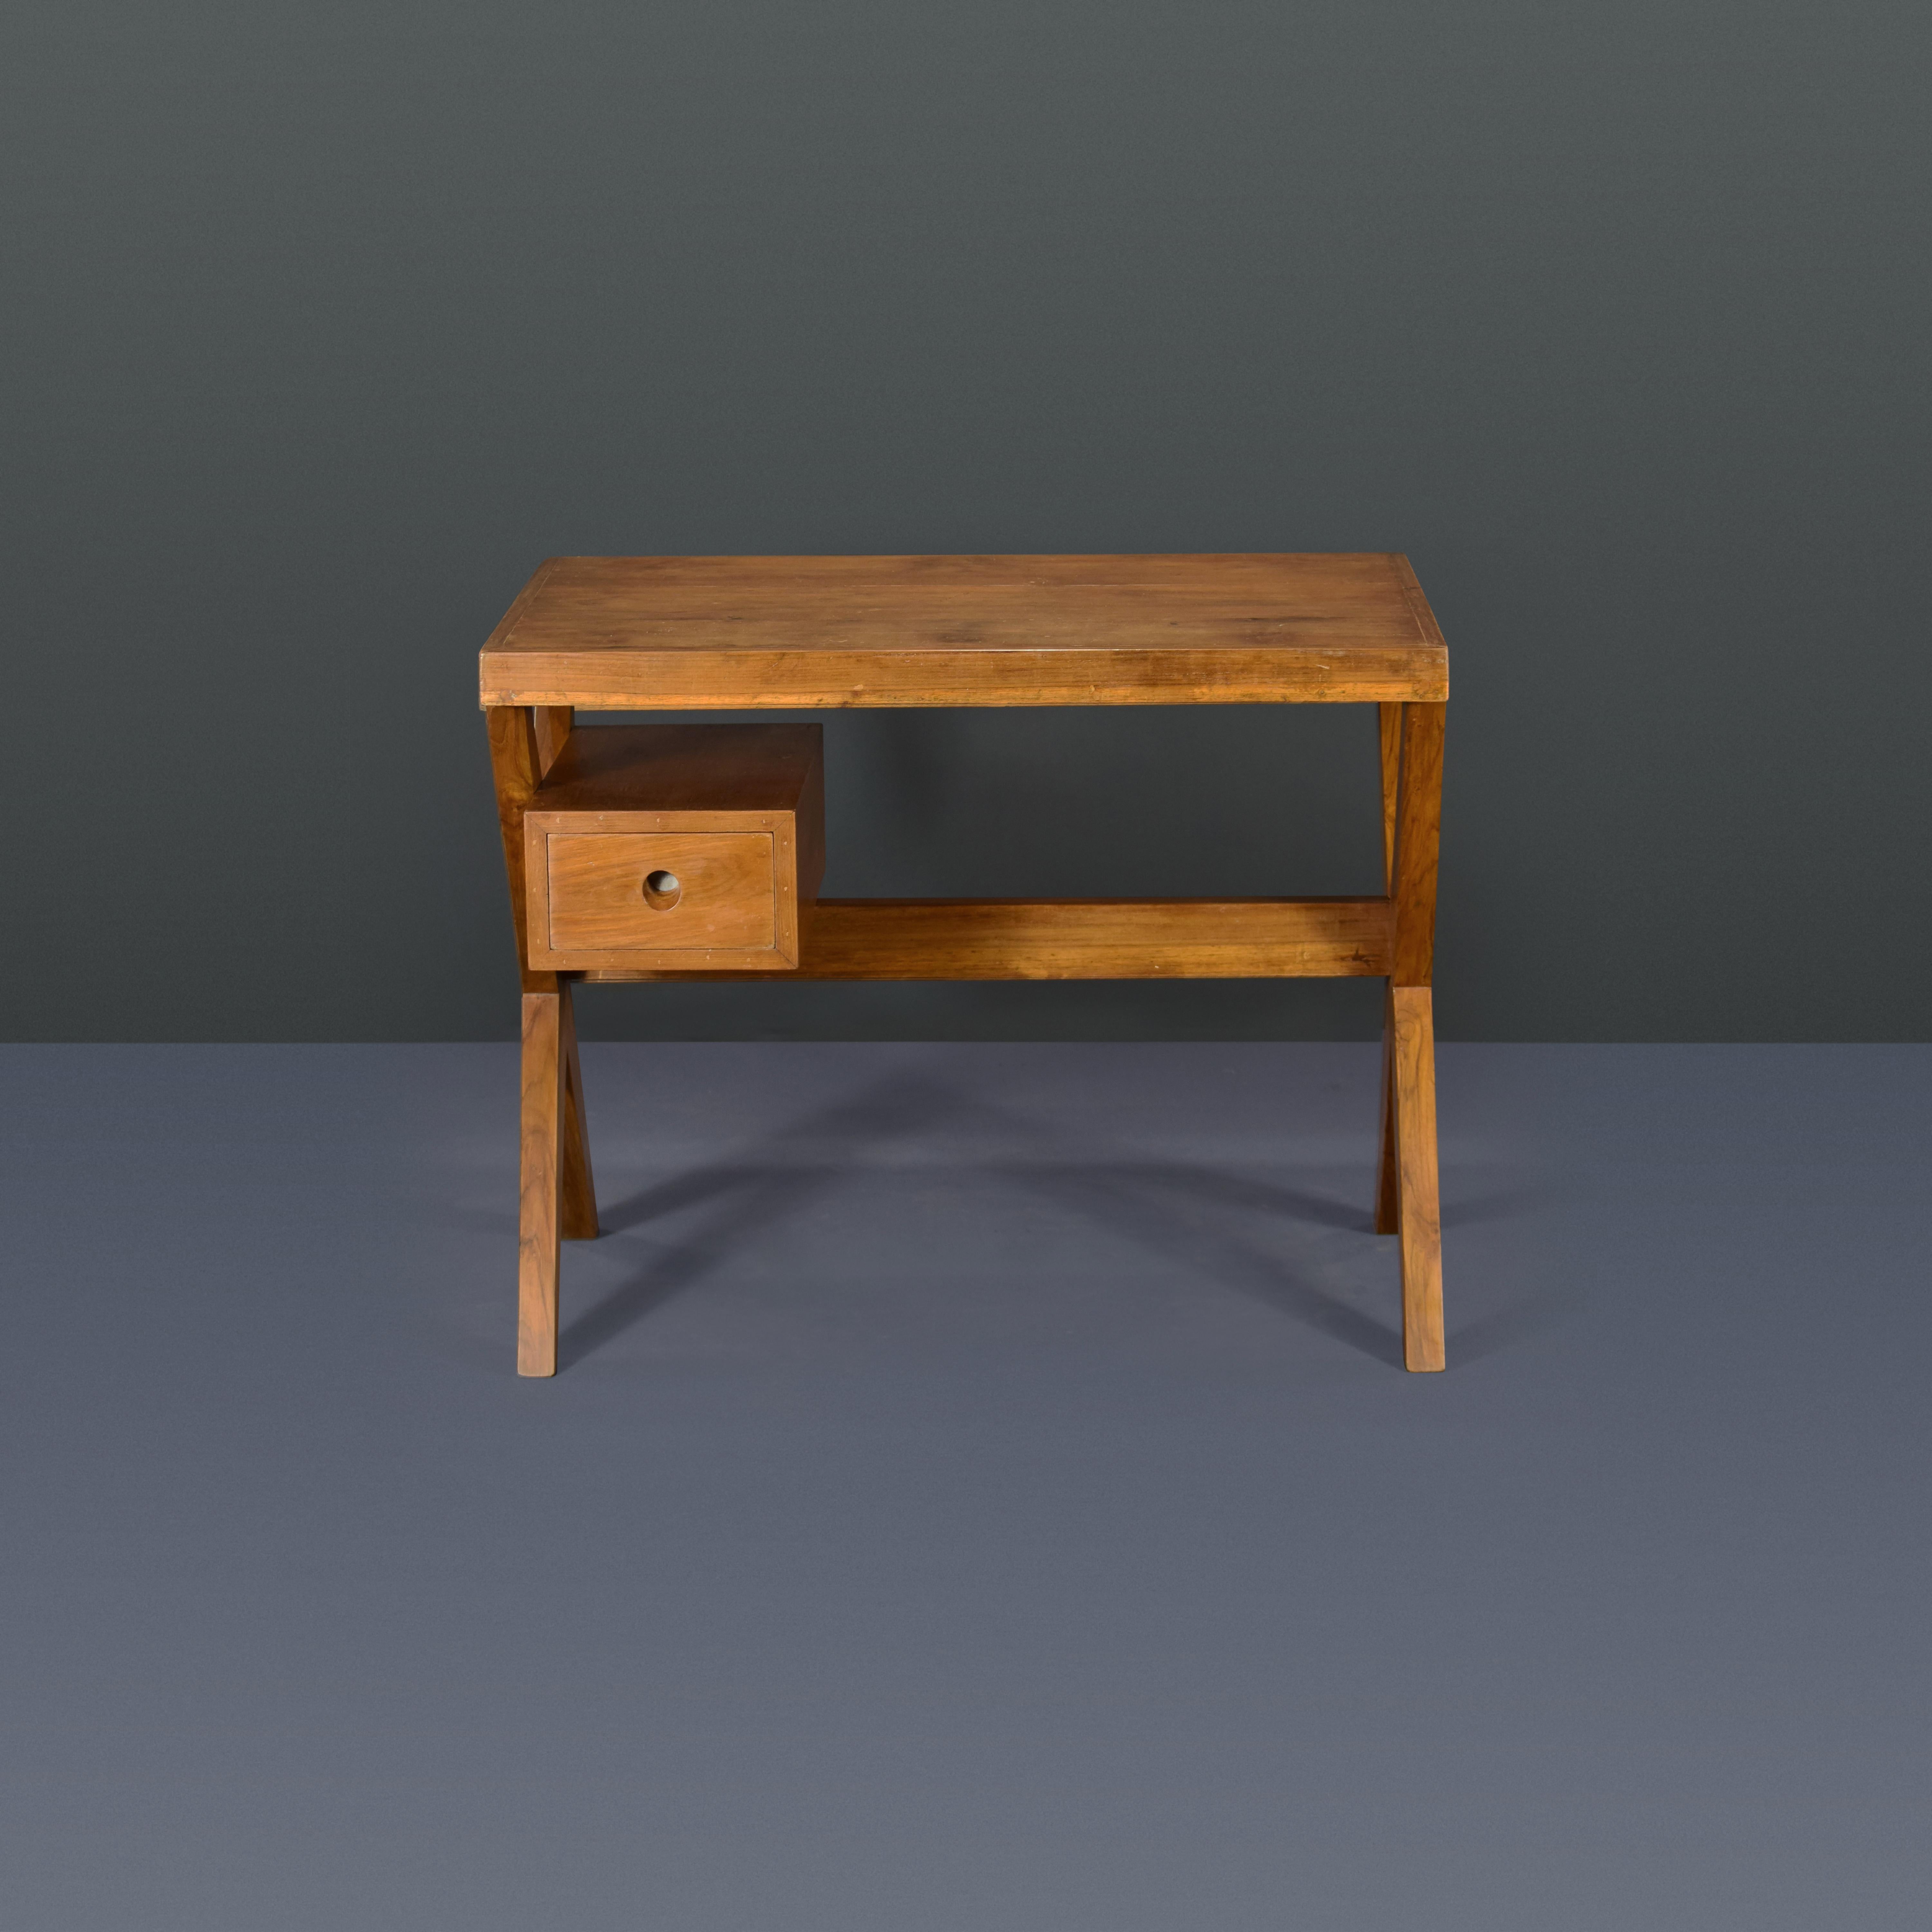 This desk is raw in its simplicity, embodying an expressing the pure ideas of Pierre Jeanneret. It is a very strong piece which I love very much, its limited to the elements it needs: drawers, top and a X-leg to hold the second side of the desk.